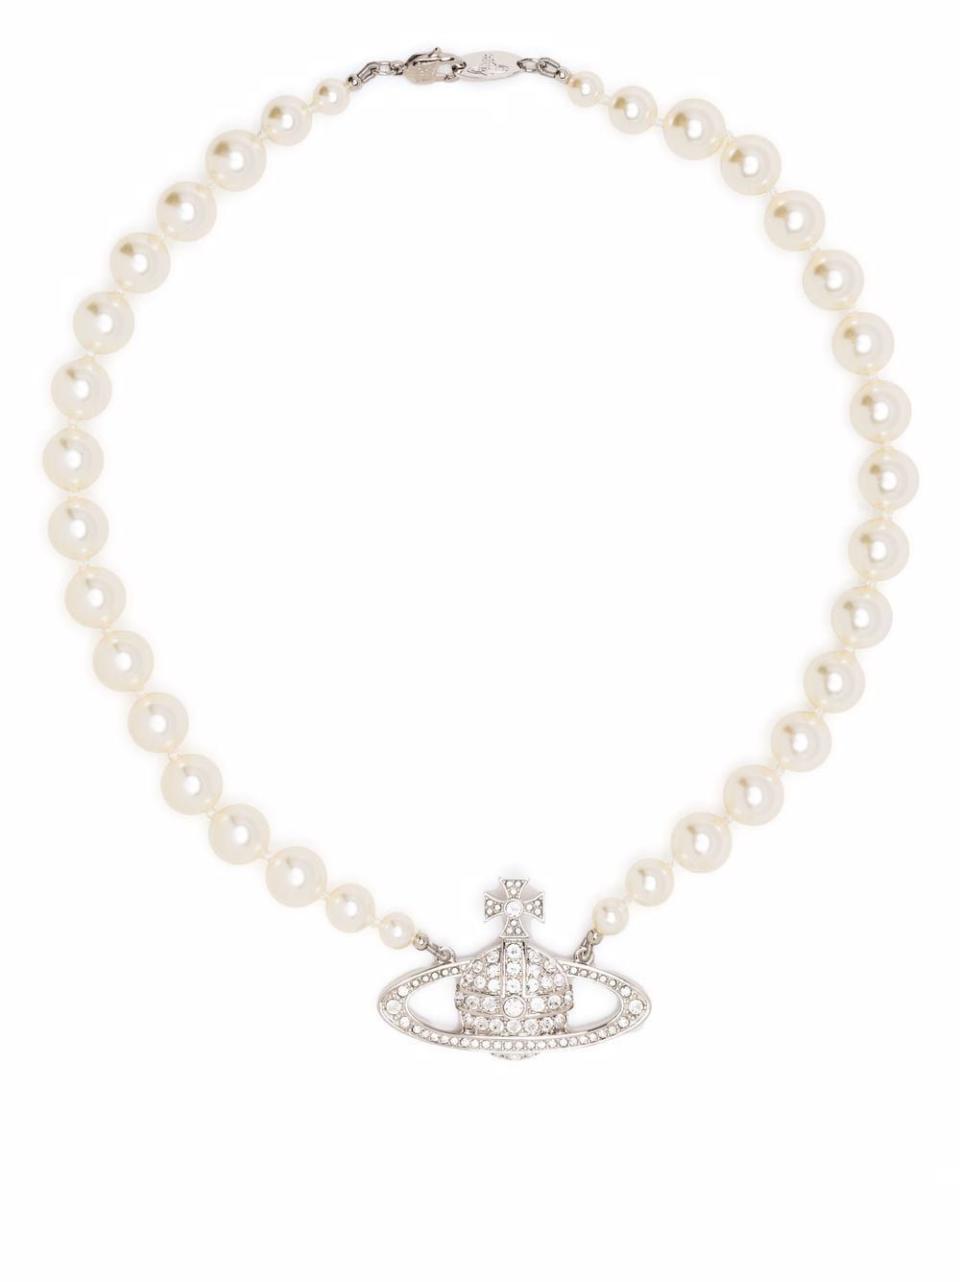 2) Orb pearl necklace